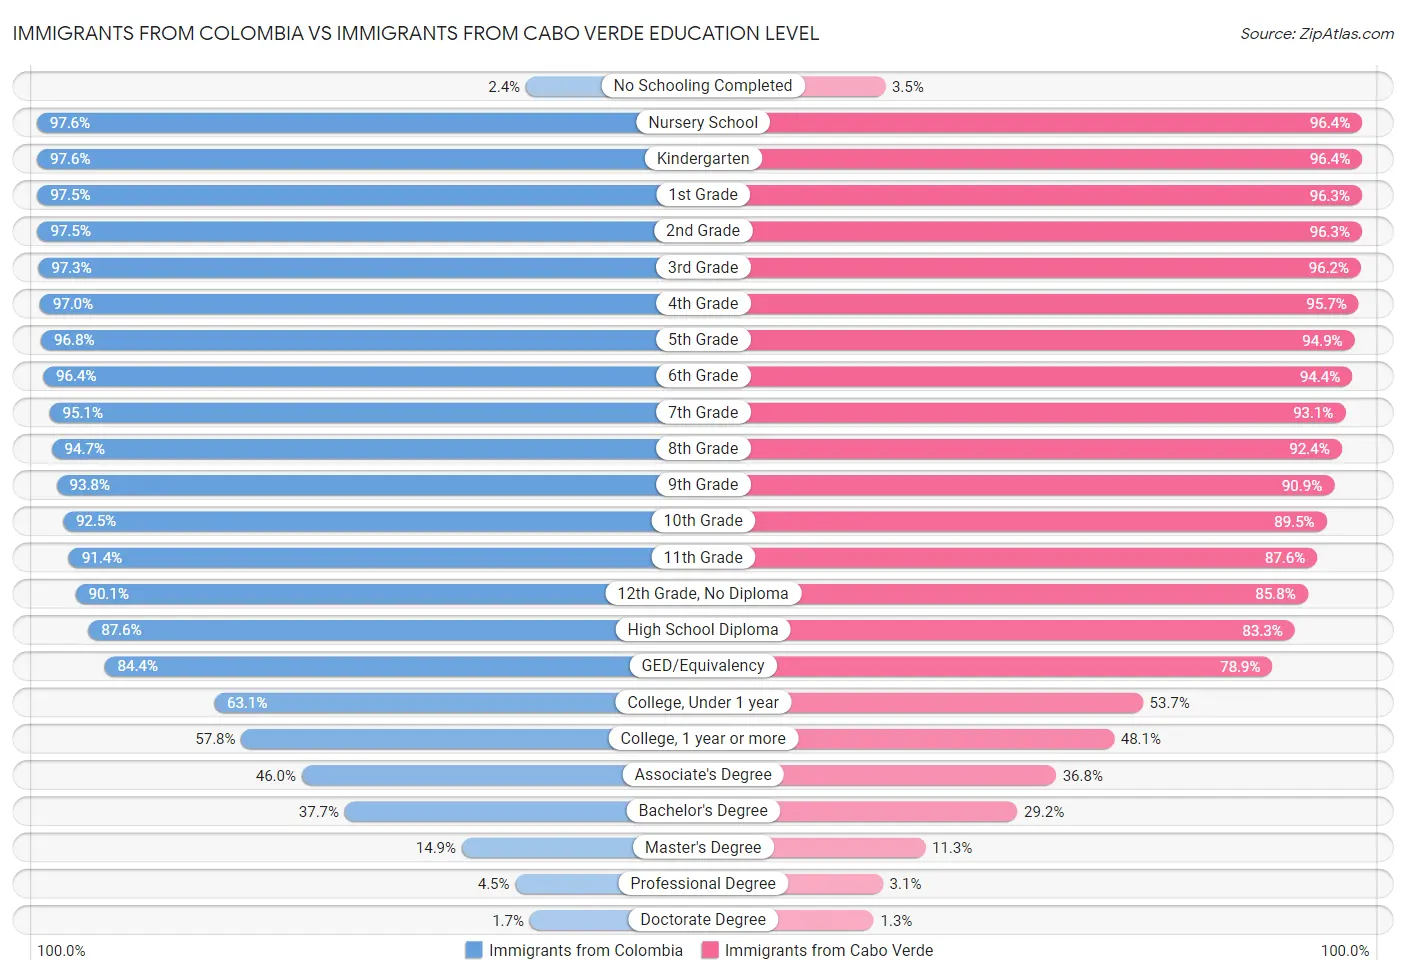 Immigrants from Colombia vs Immigrants from Cabo Verde Education Level